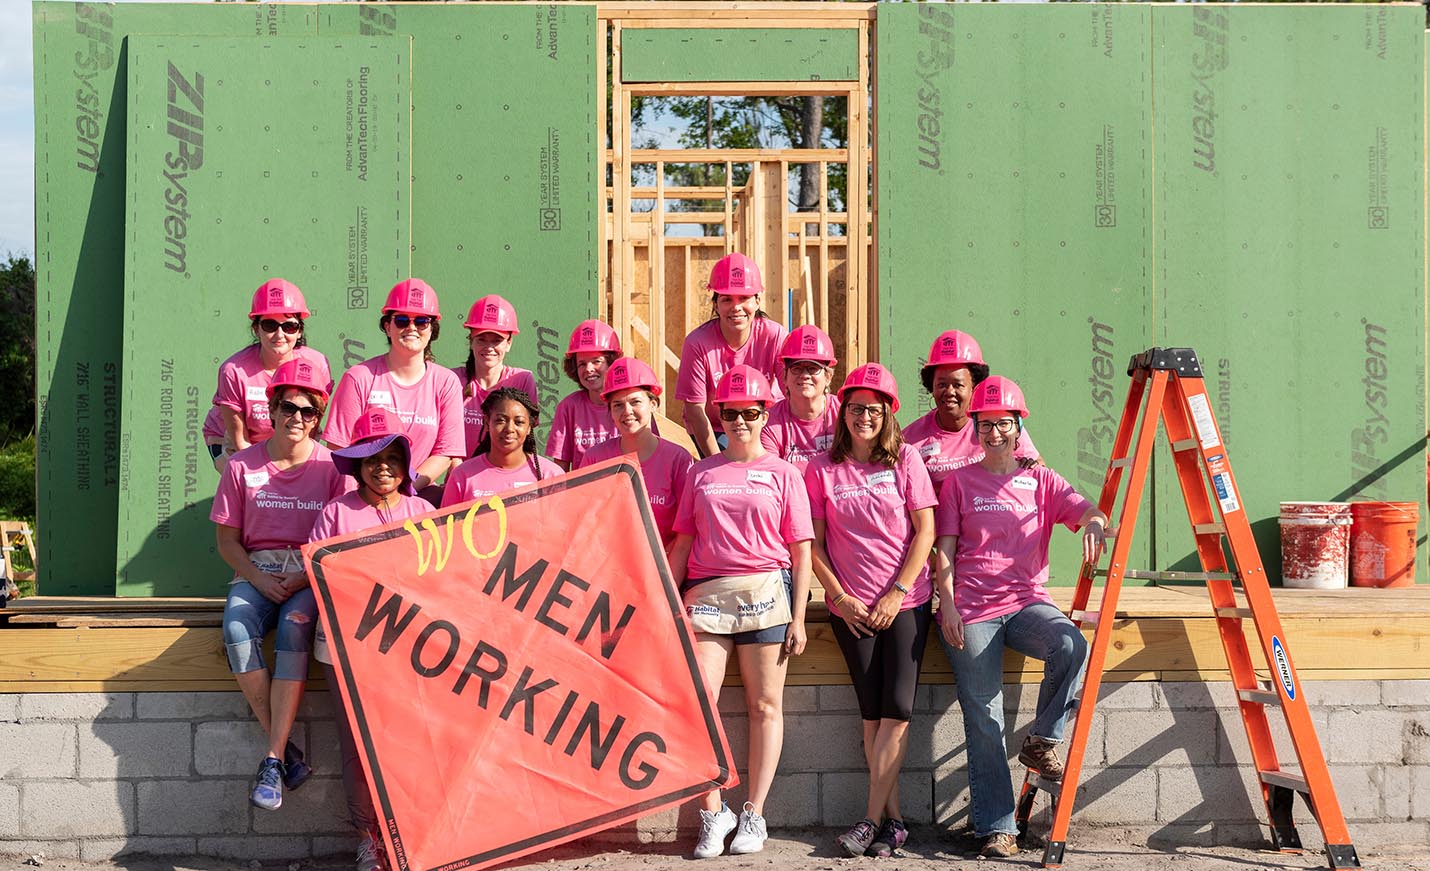 Femaie students in pink shirts at a construction project with a women working sign